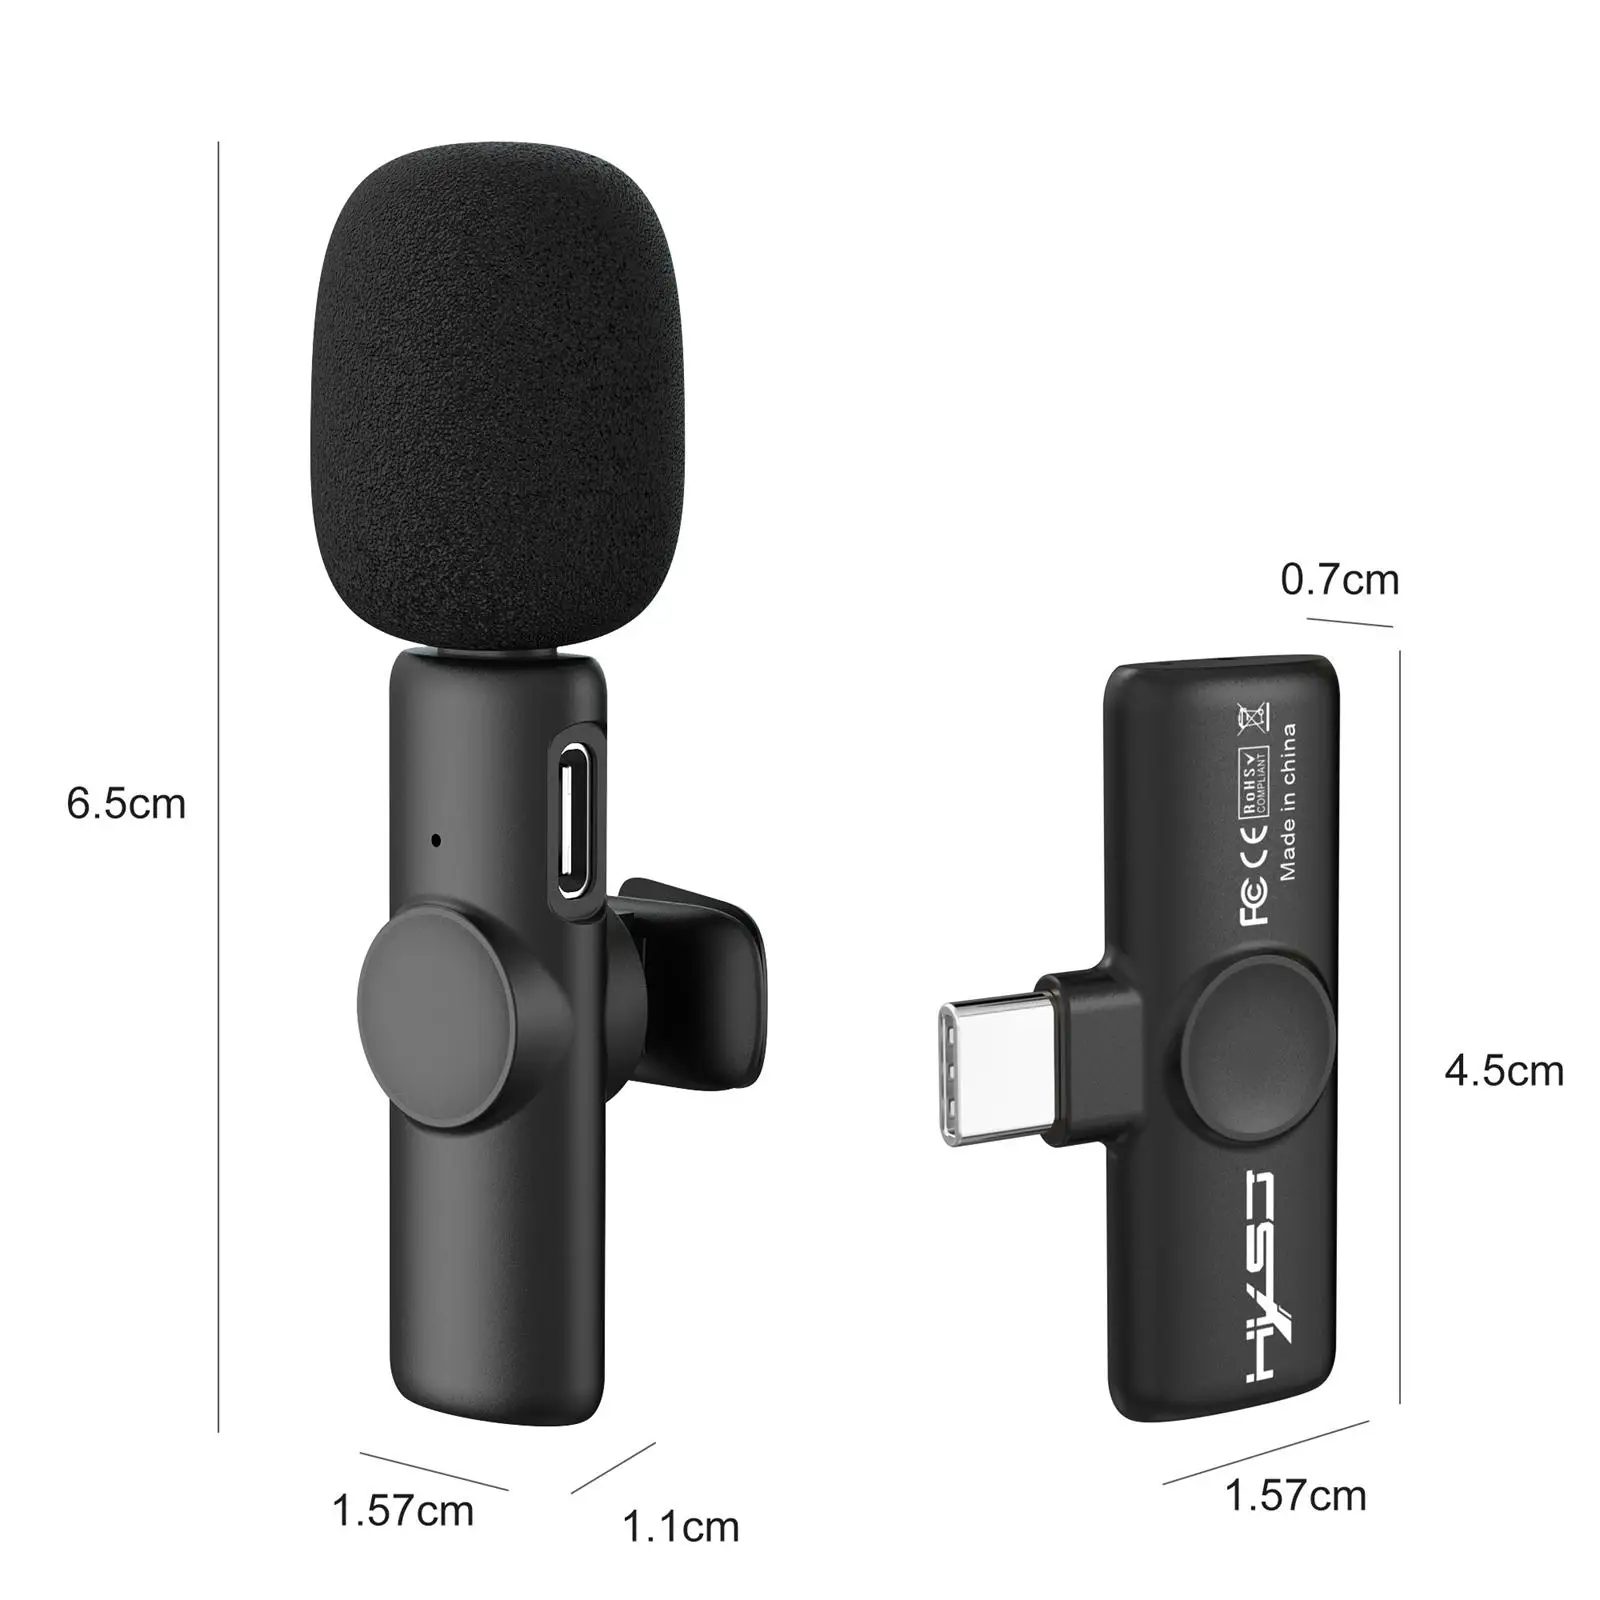   Microphone   Transmitter Sound Pickup PC Recording External Lapel Mic for Video Meeting Live  